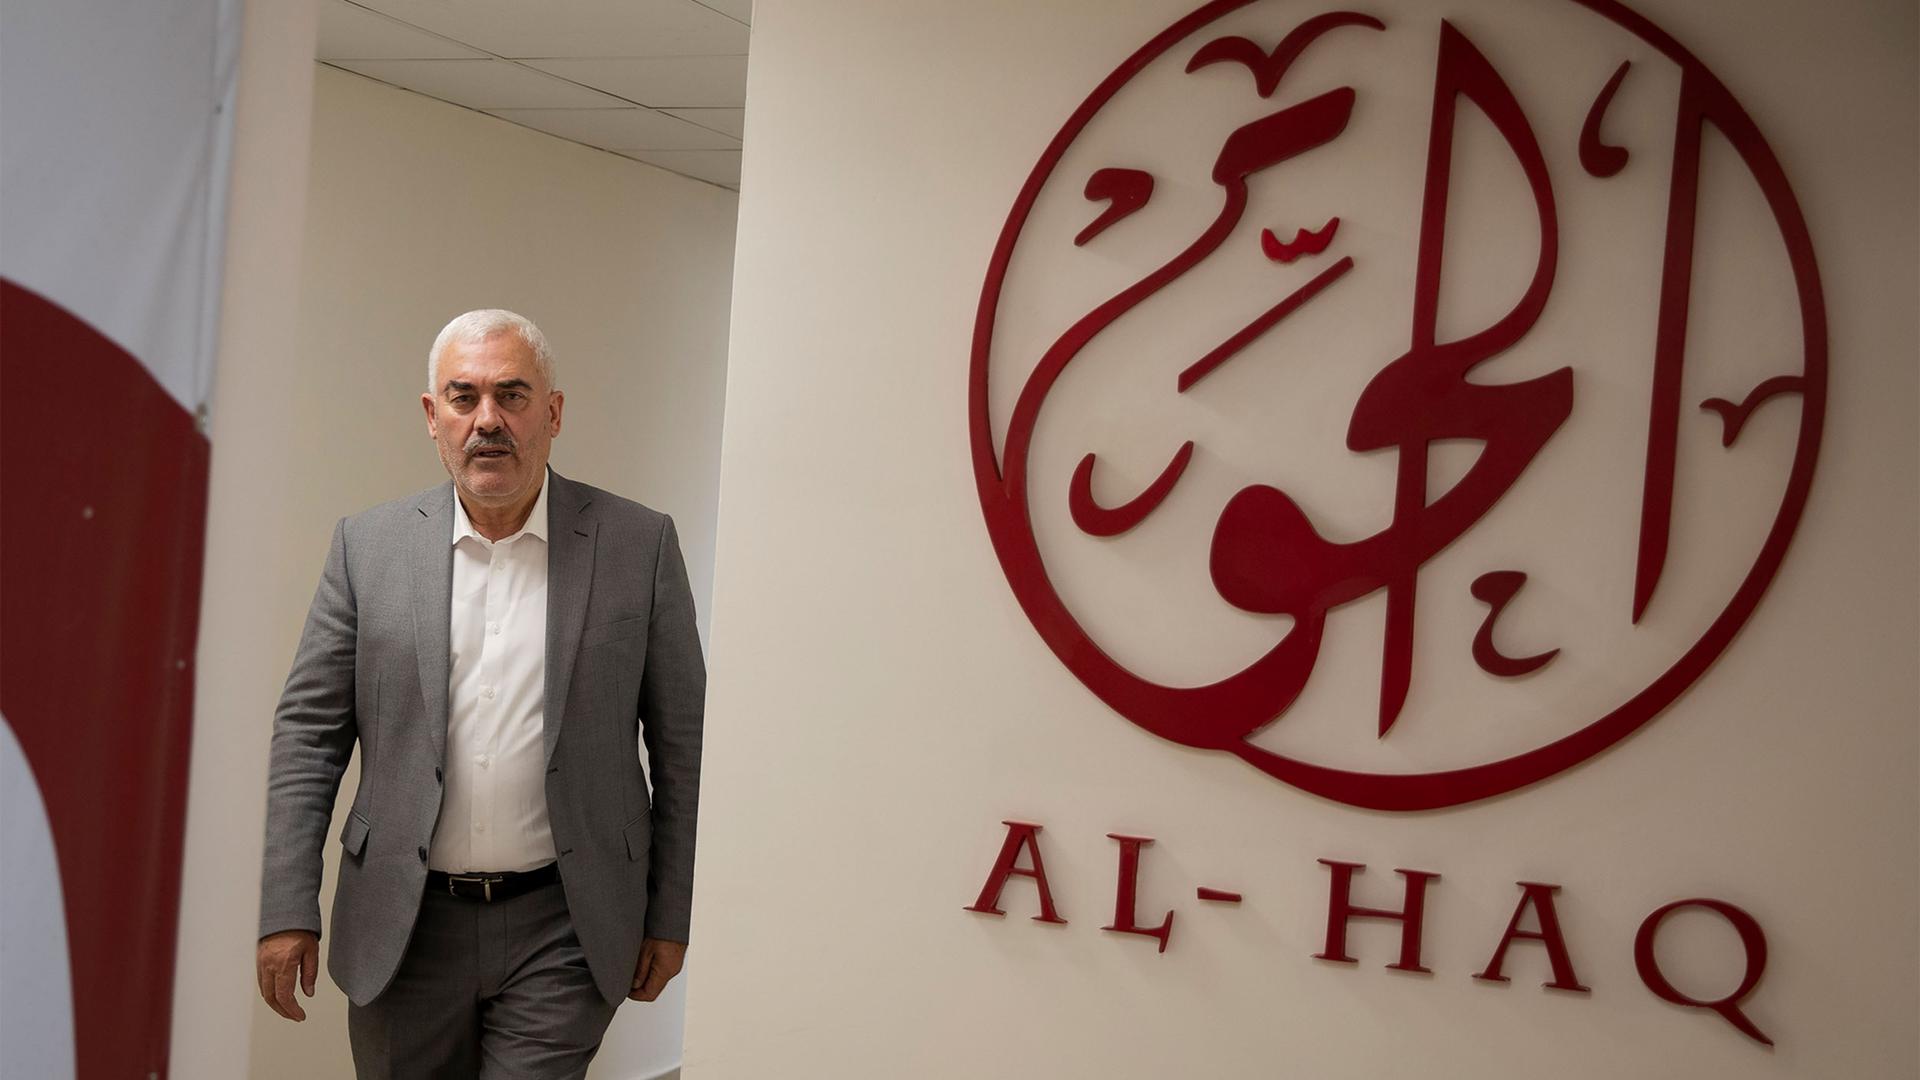 Shawan Jabarin, director of the al-Haq human rights group, at the organization's offices in the West Bank city of Ramallah